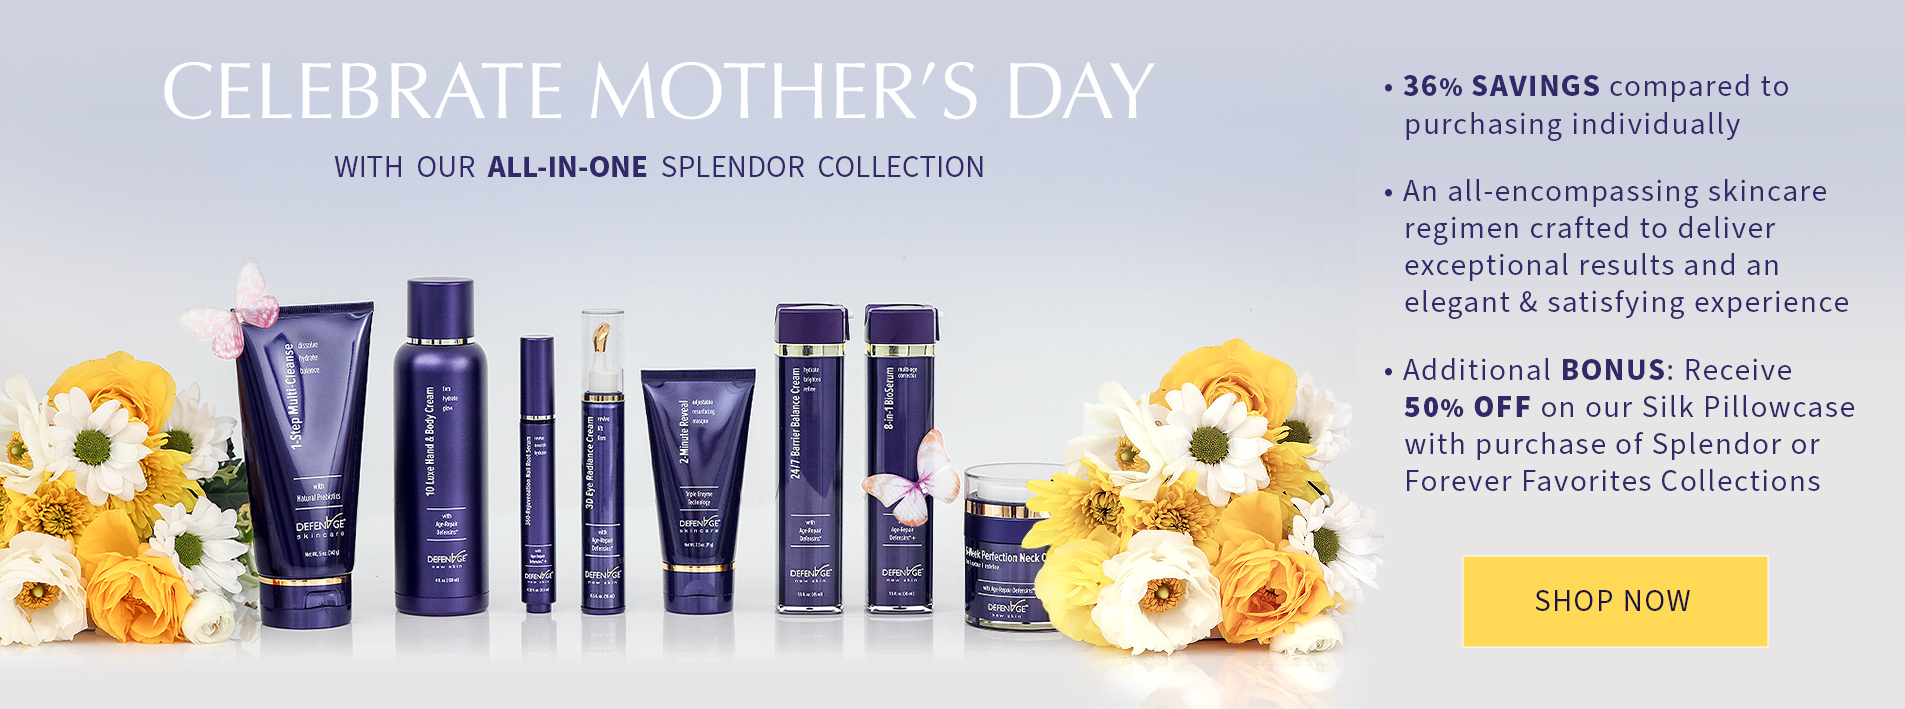 Celebrate Mother's Day With The All In One Splendor Collection